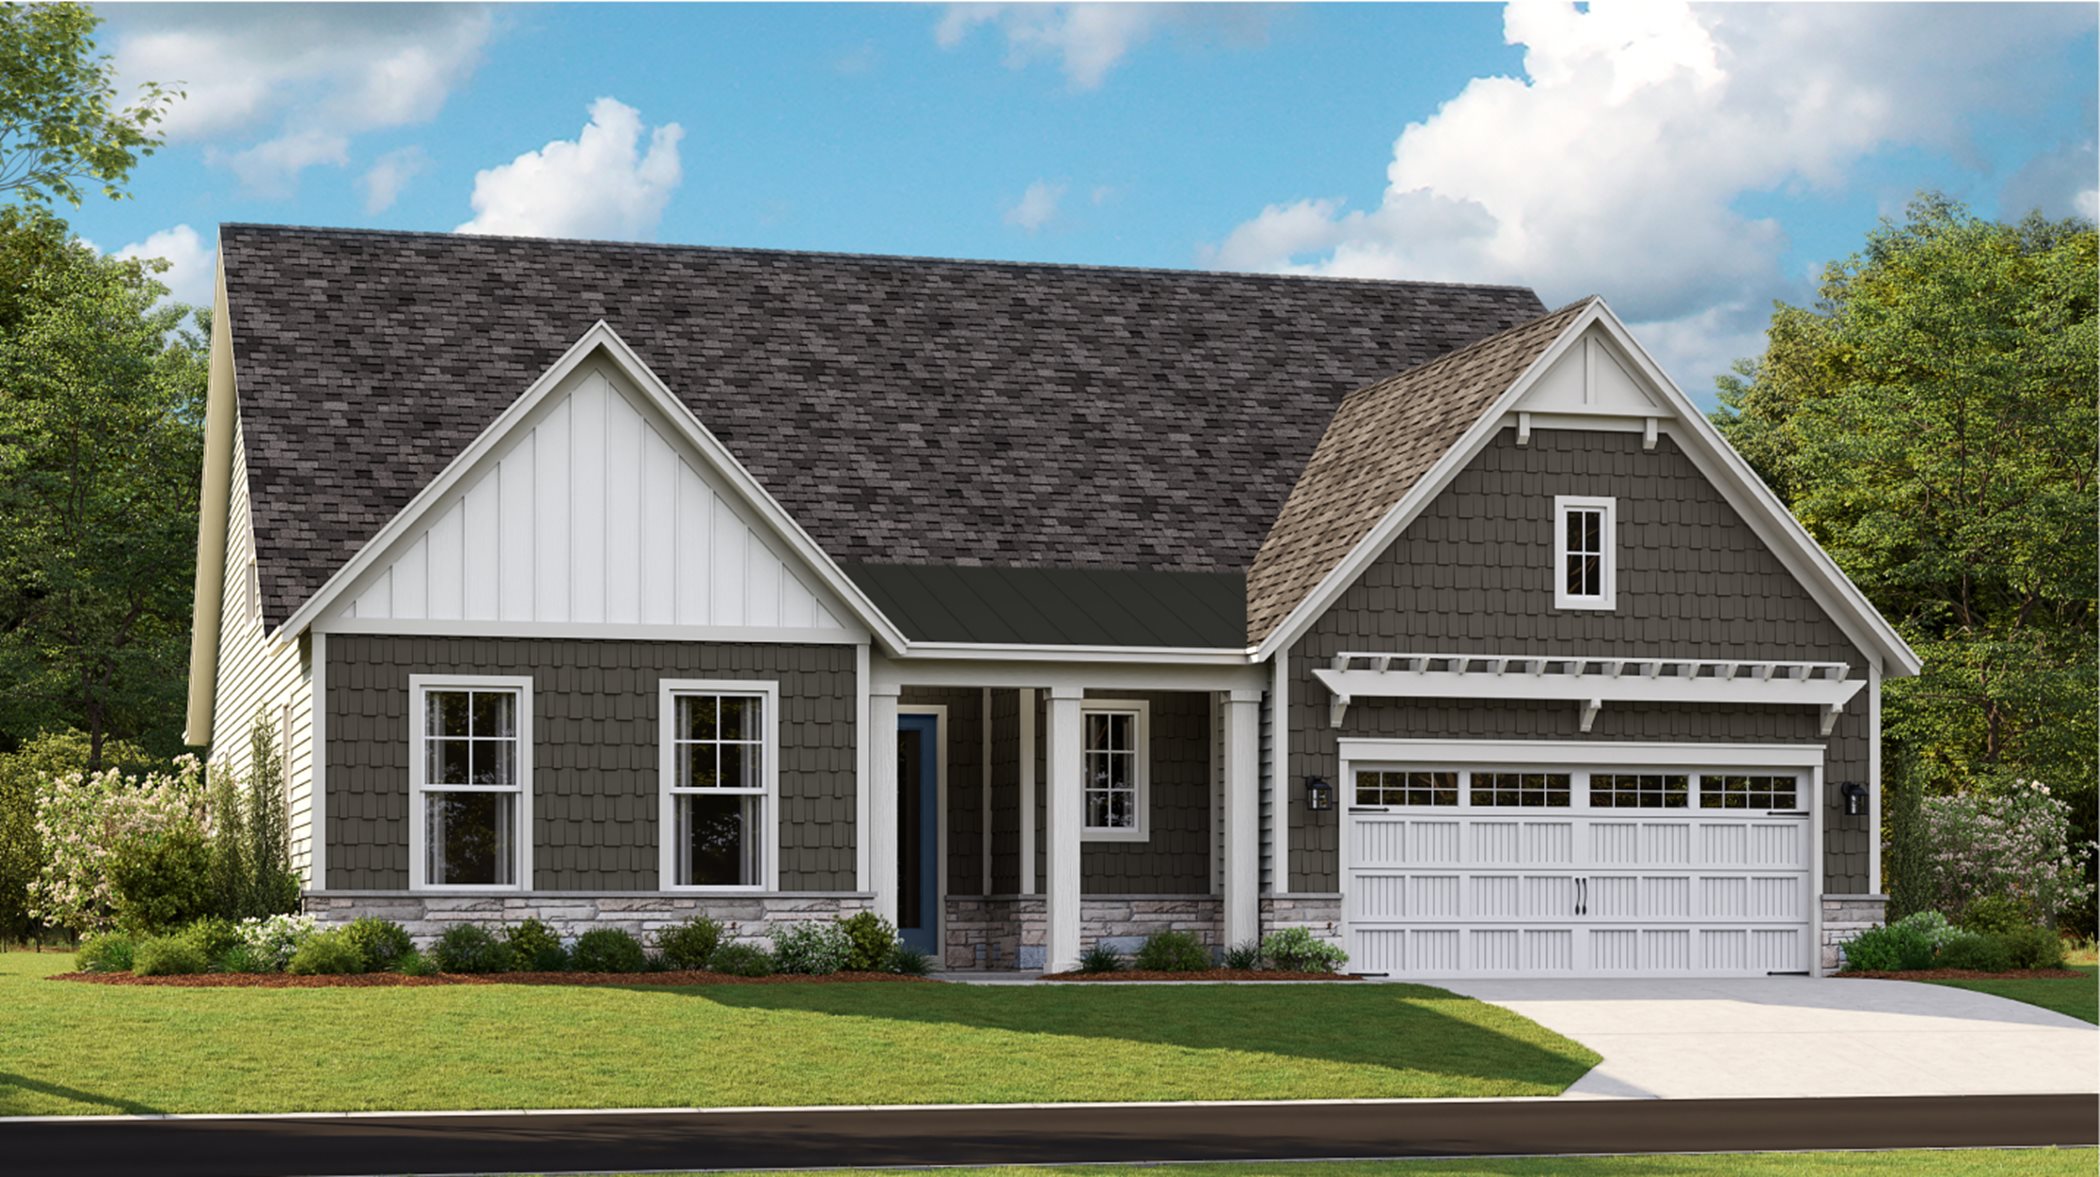 Southport exterior rendering